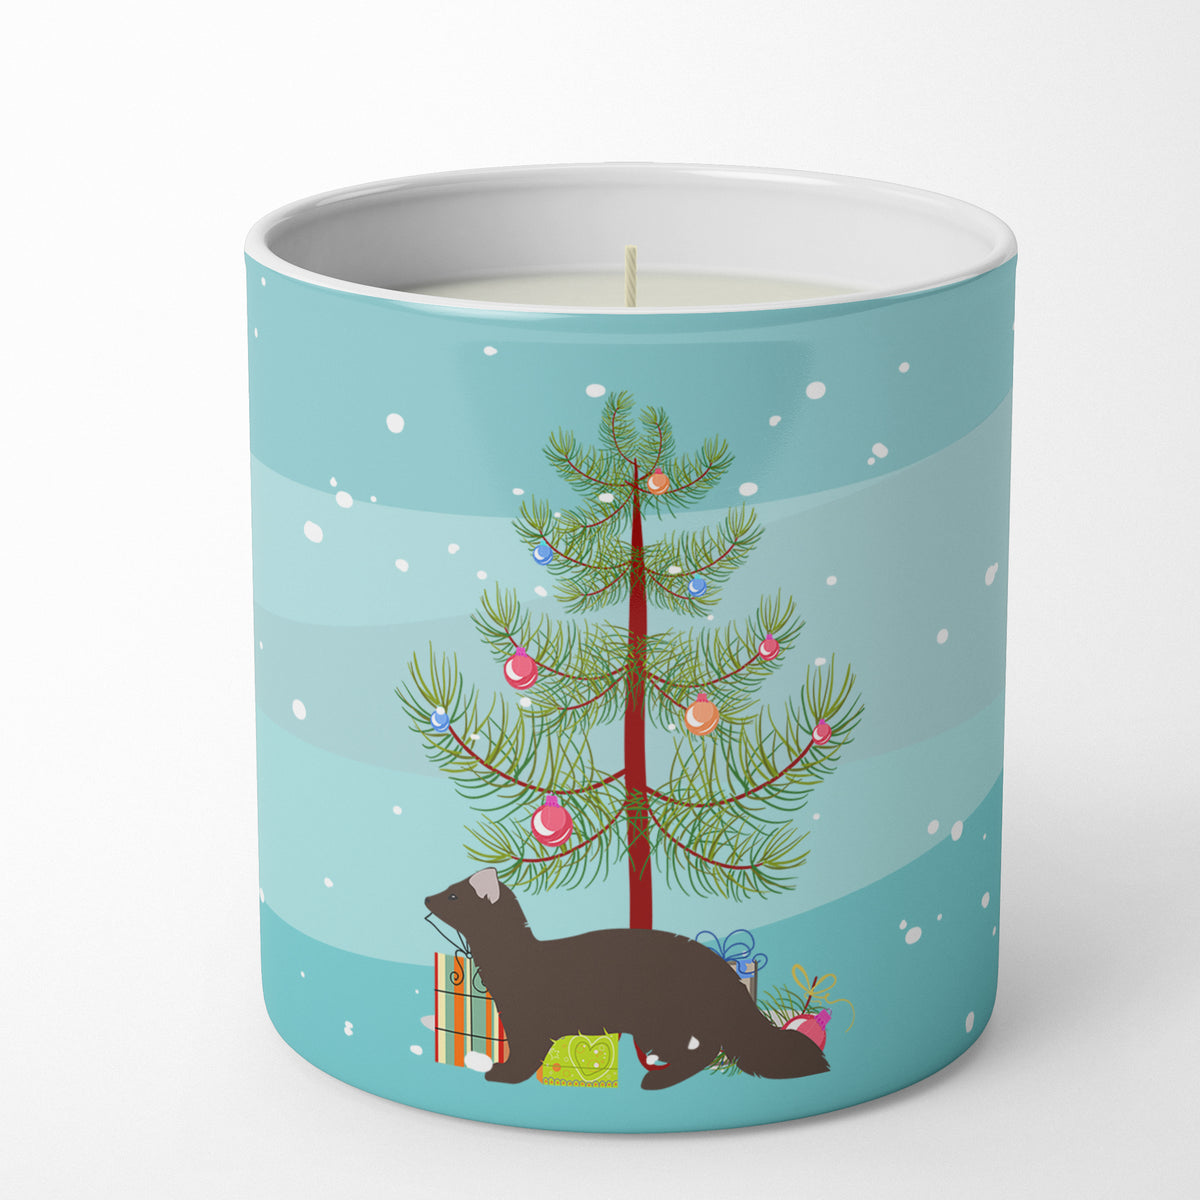 Buy this Sable Marten Christmas 10 oz Decorative Soy Candle